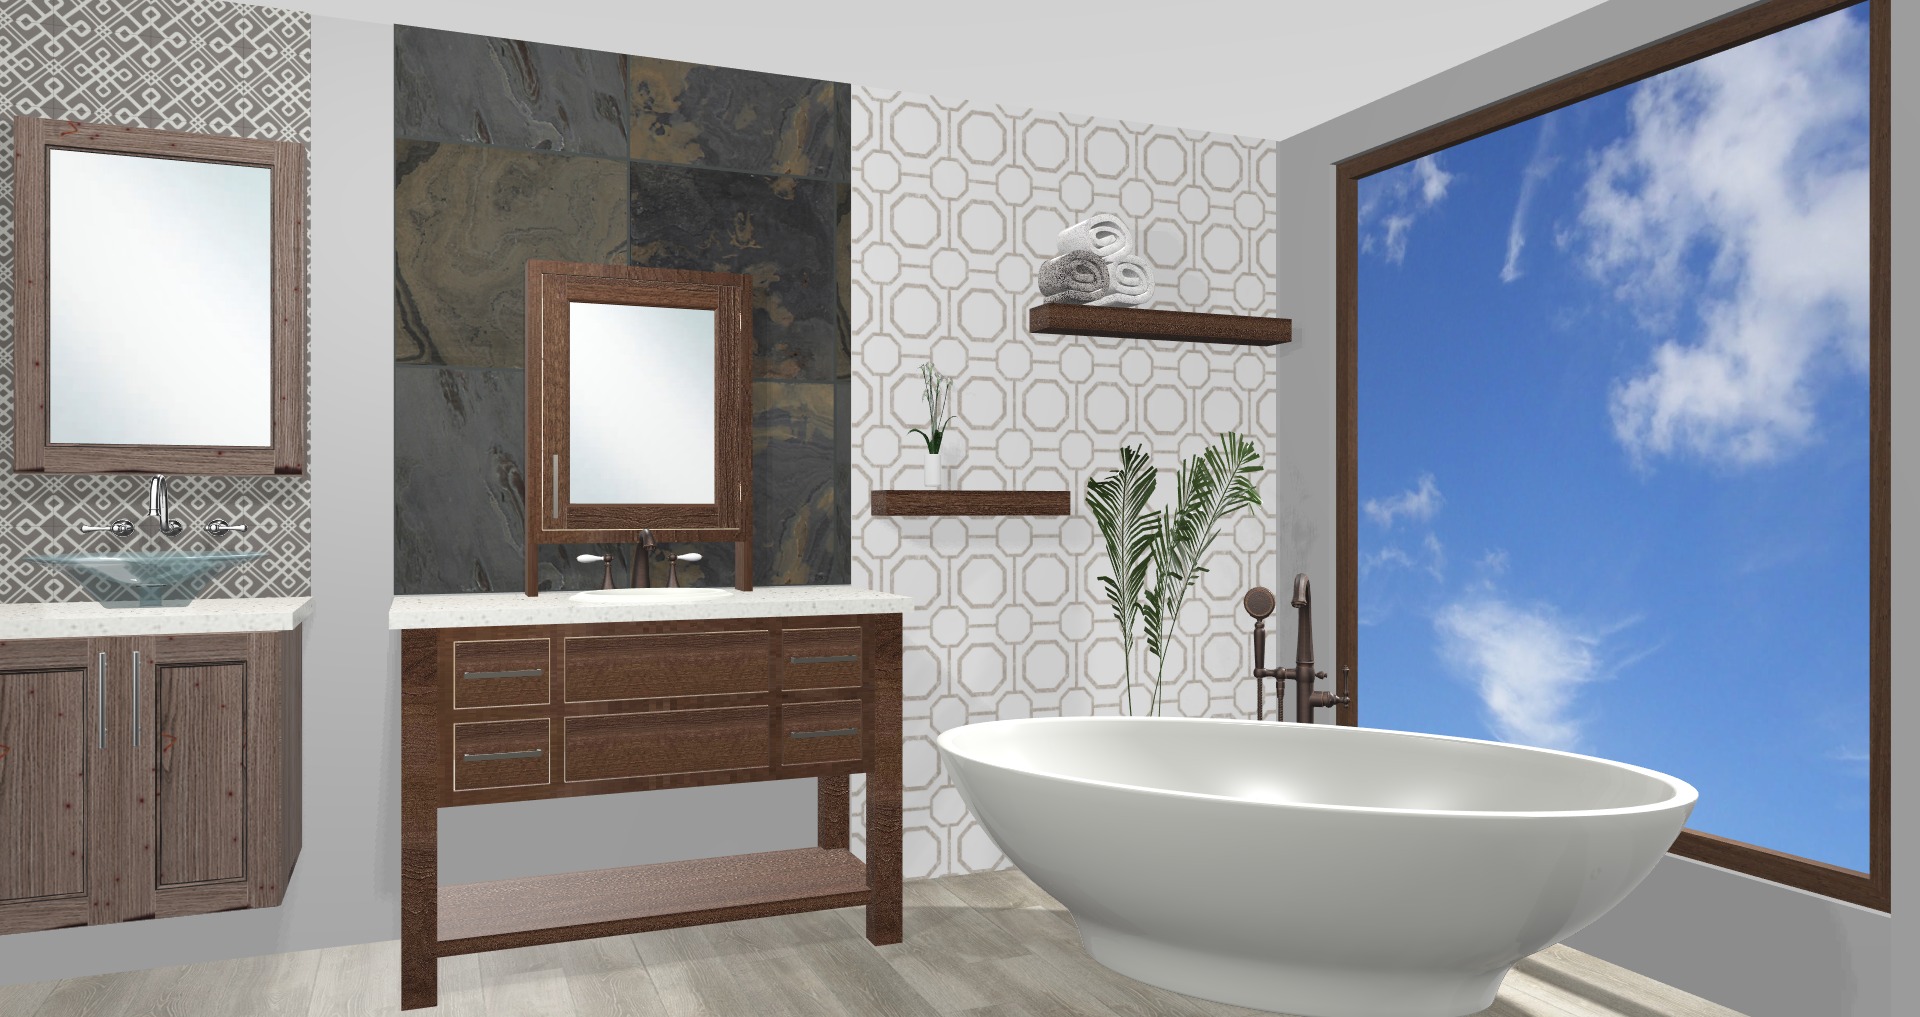 3-D Rendering of Spa Bathroom in our space DreamMaker Bath & Kitchen of Larimer County Fort Collins (970)616-0900